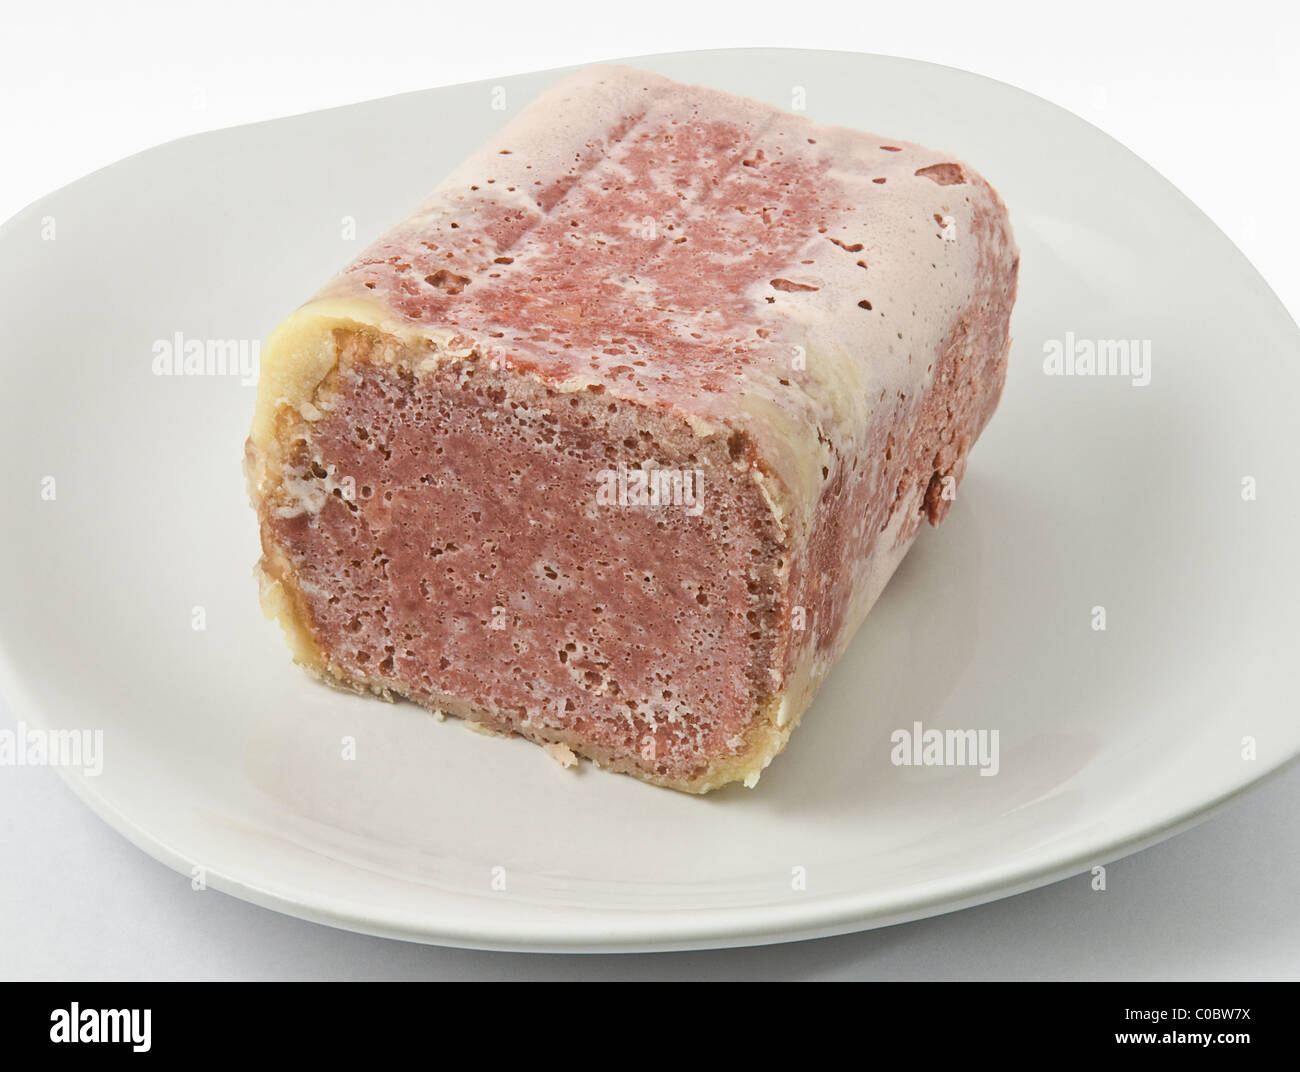 Corned beef on a white plate ready for cutting Stock Photo